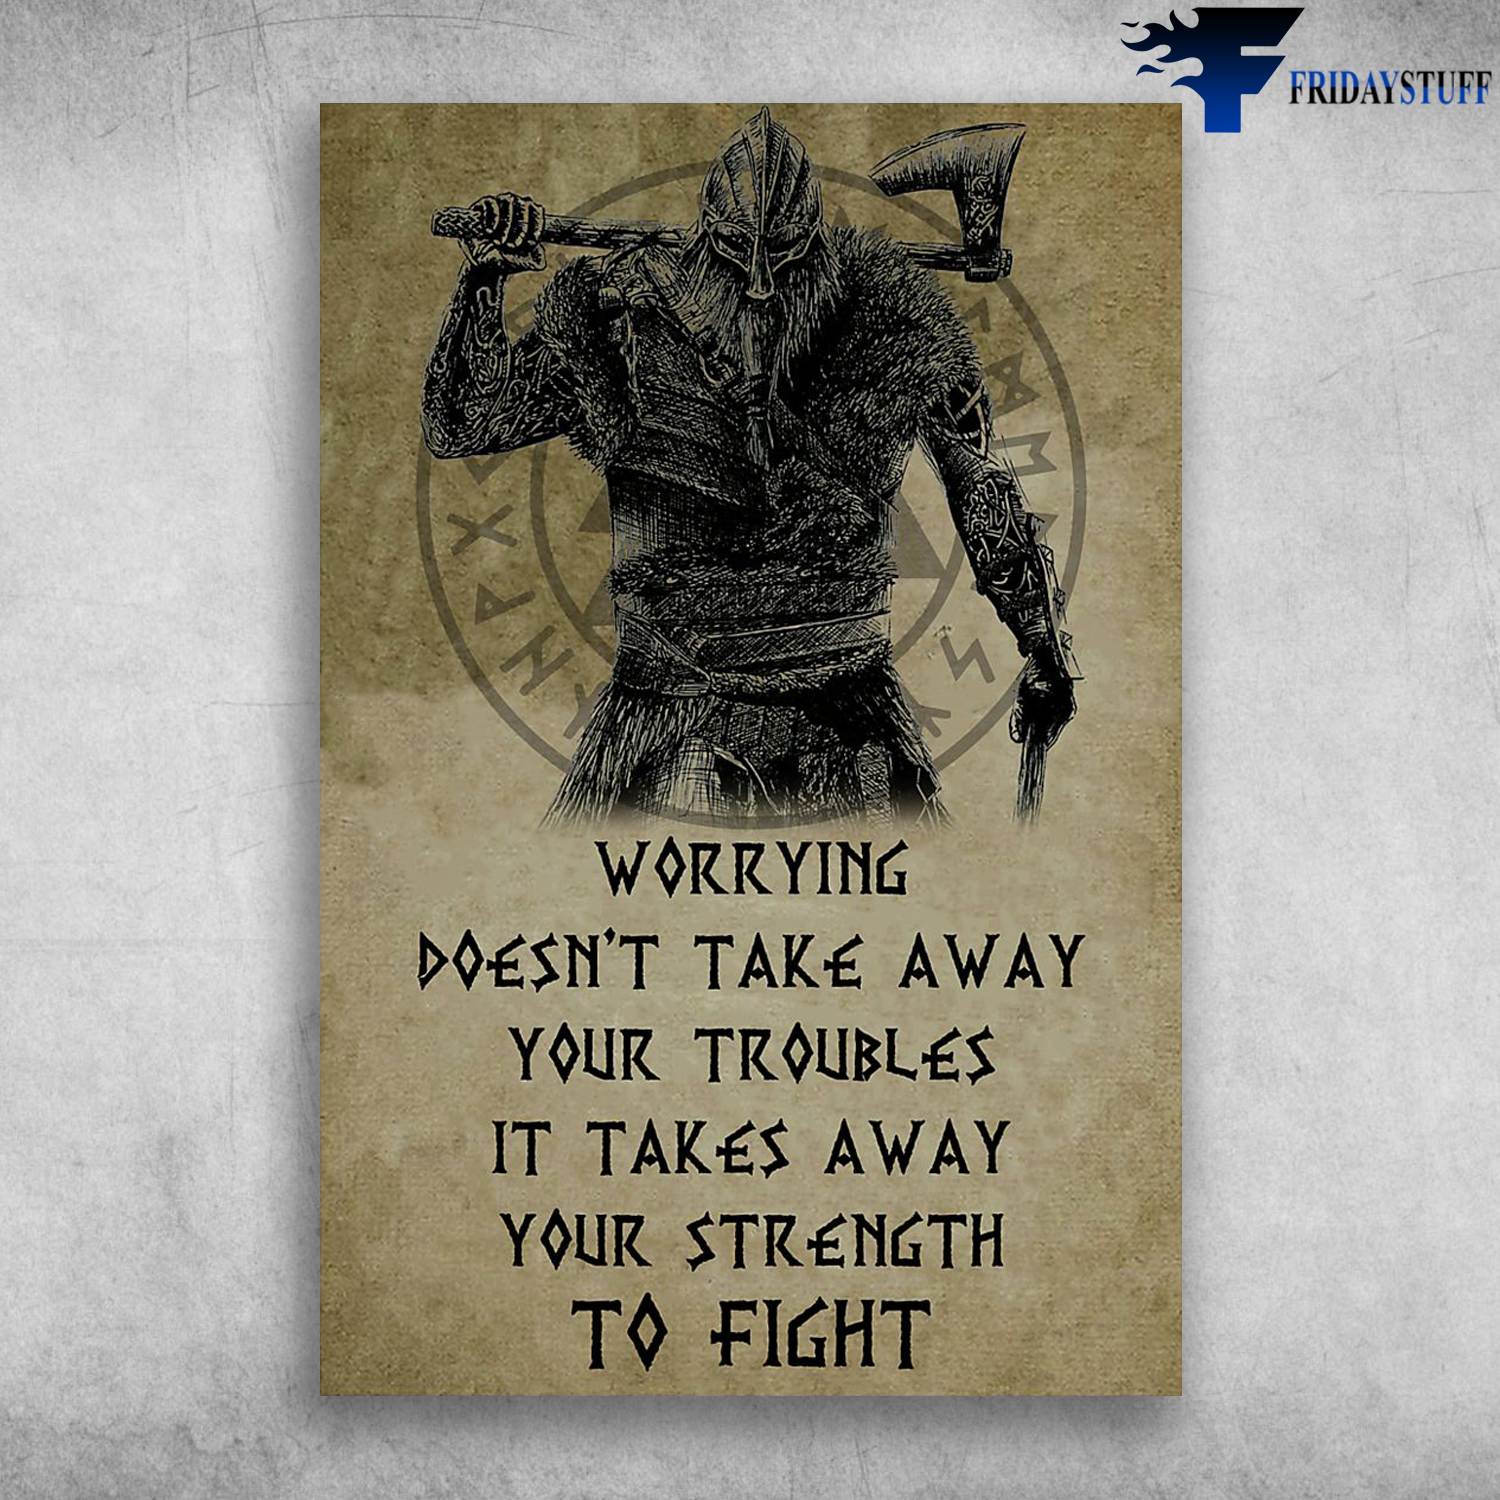 Viking Worrying Doesn't Take Away Your Troubles It Takes Away Your Strength To Fight